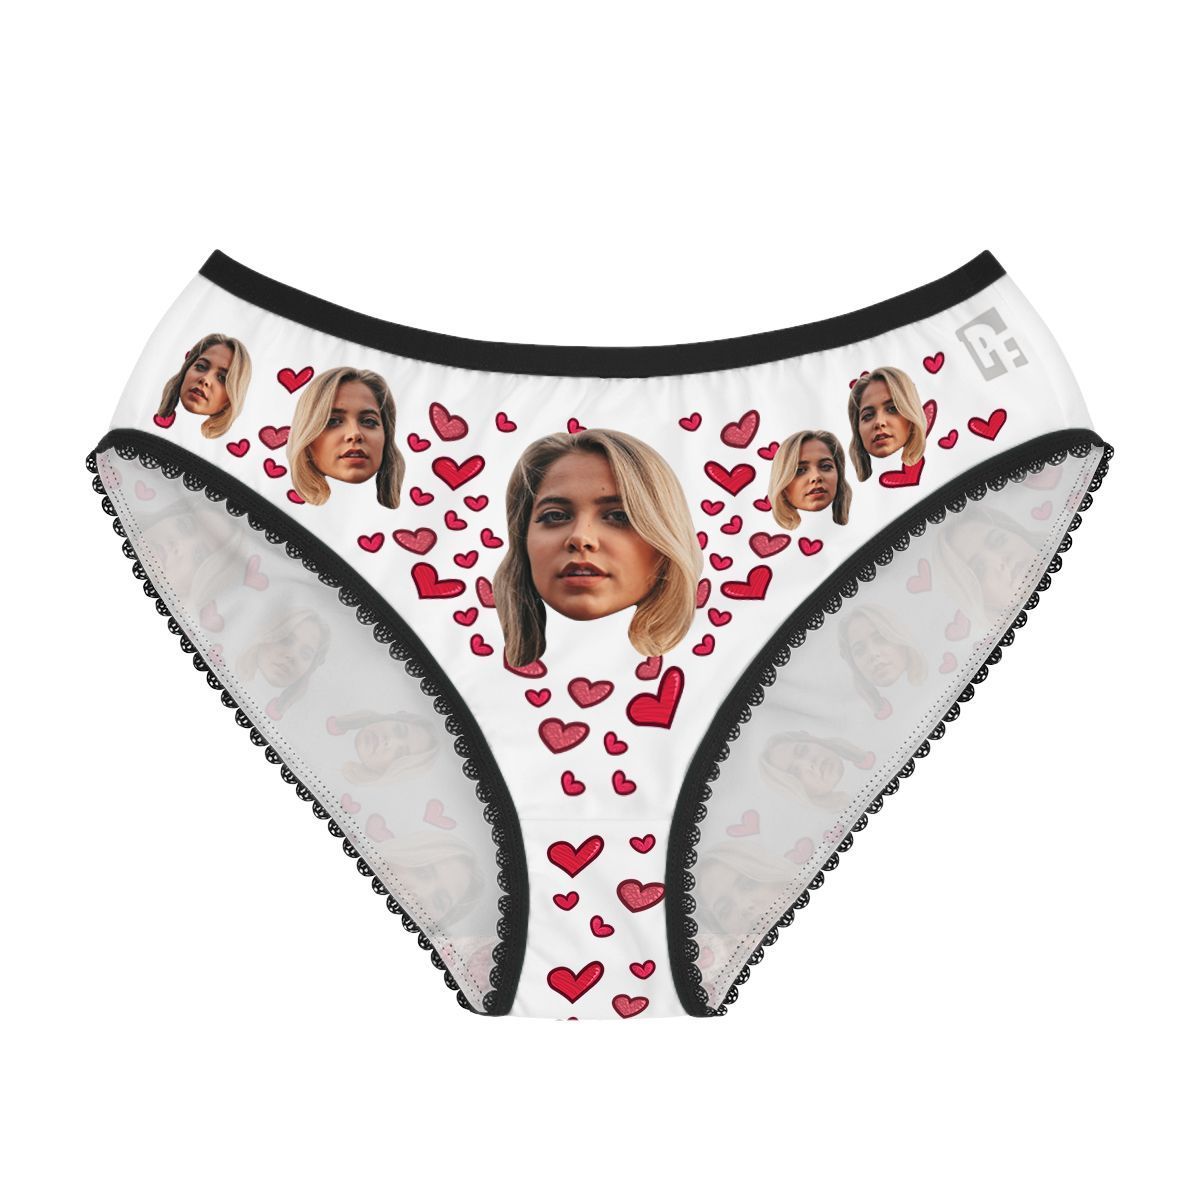 Blue Heart women's underwear briefs personalized with photo printed on them